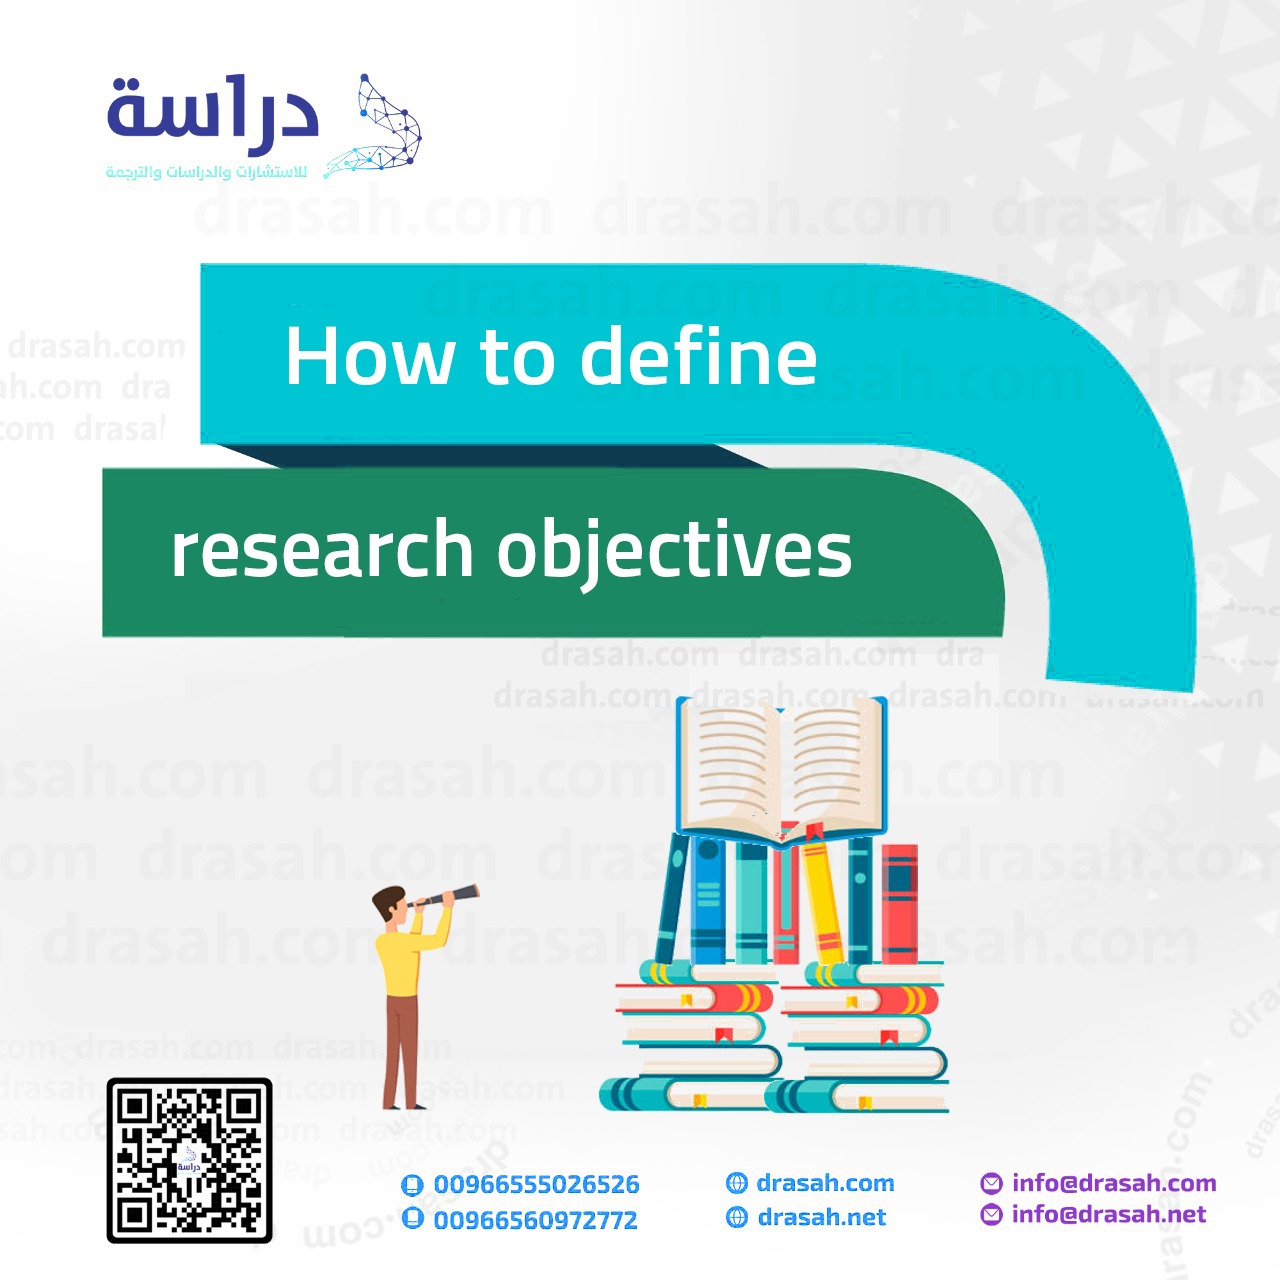 How to define research objectives